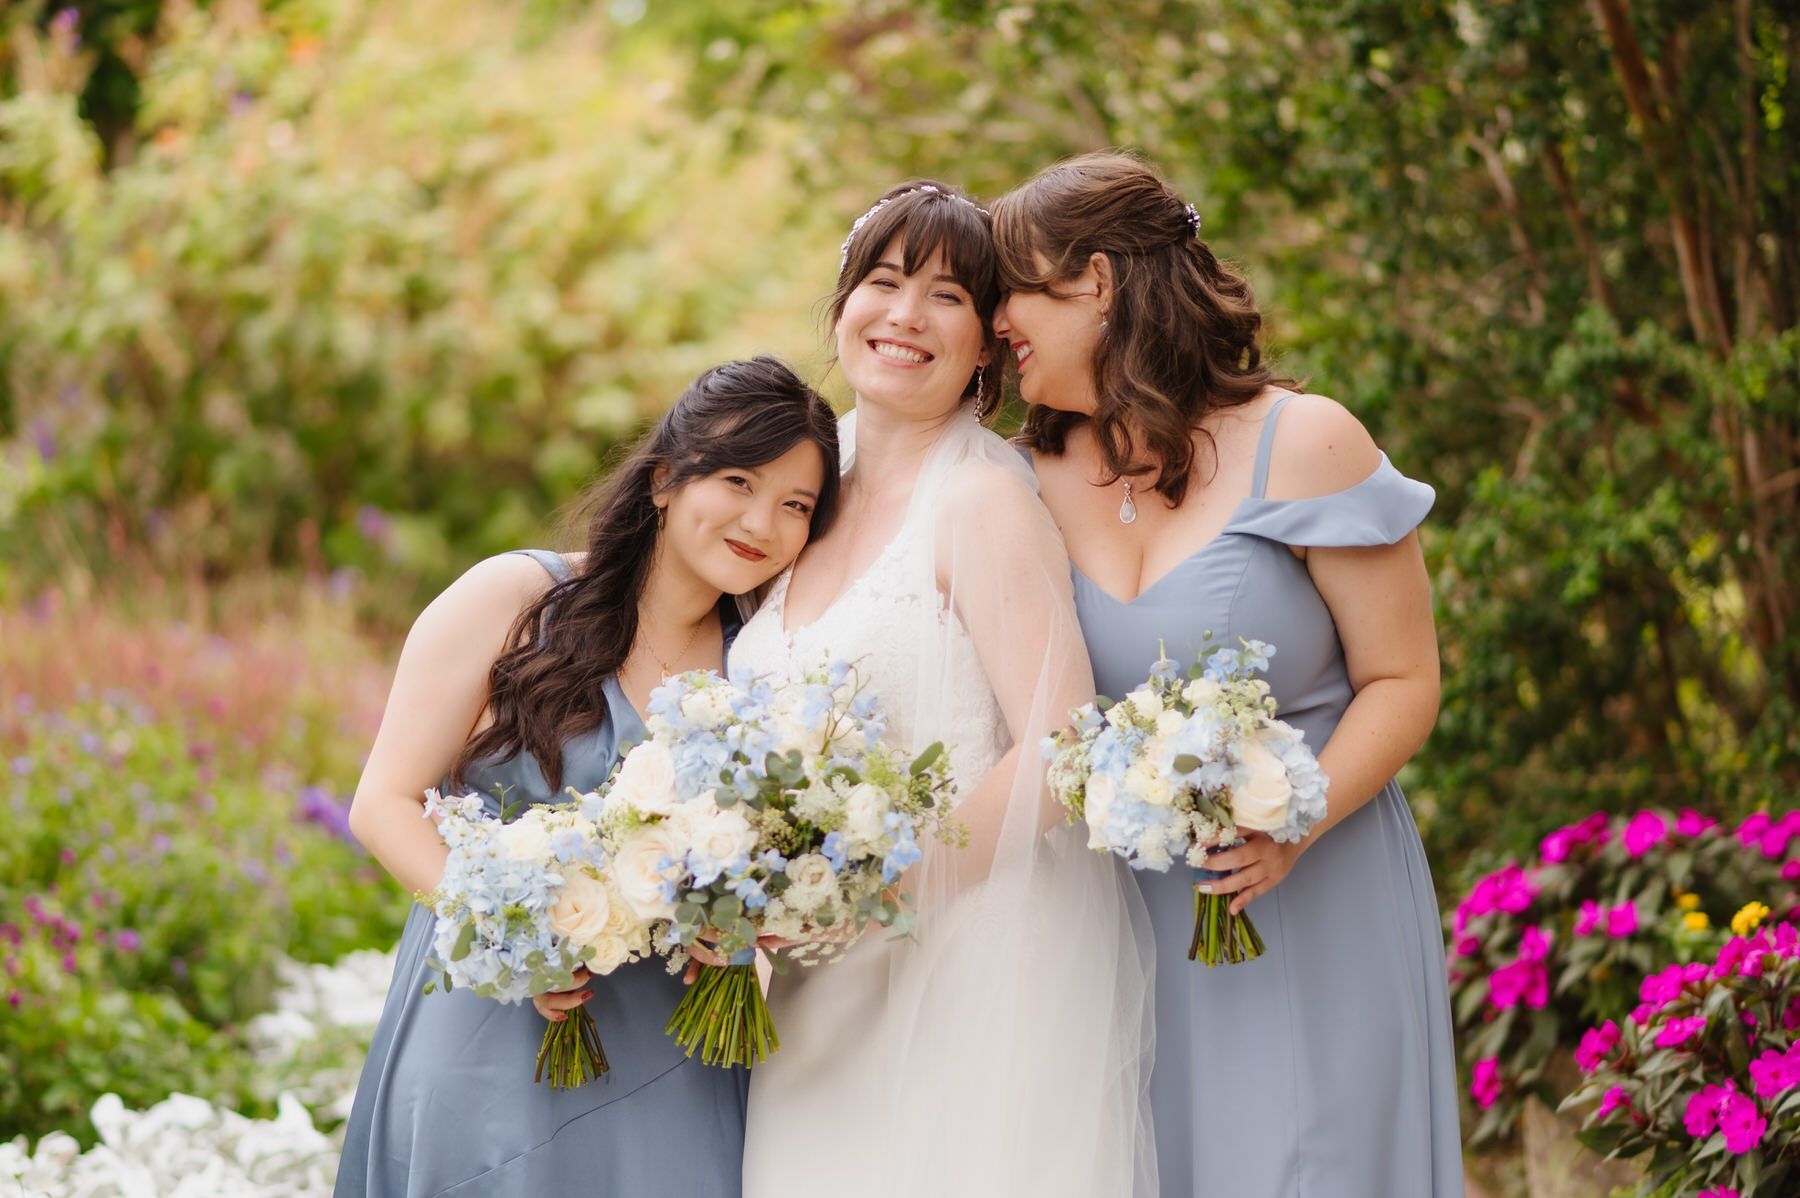 A bride and her bridesmaids are posing for a picture in a garden.